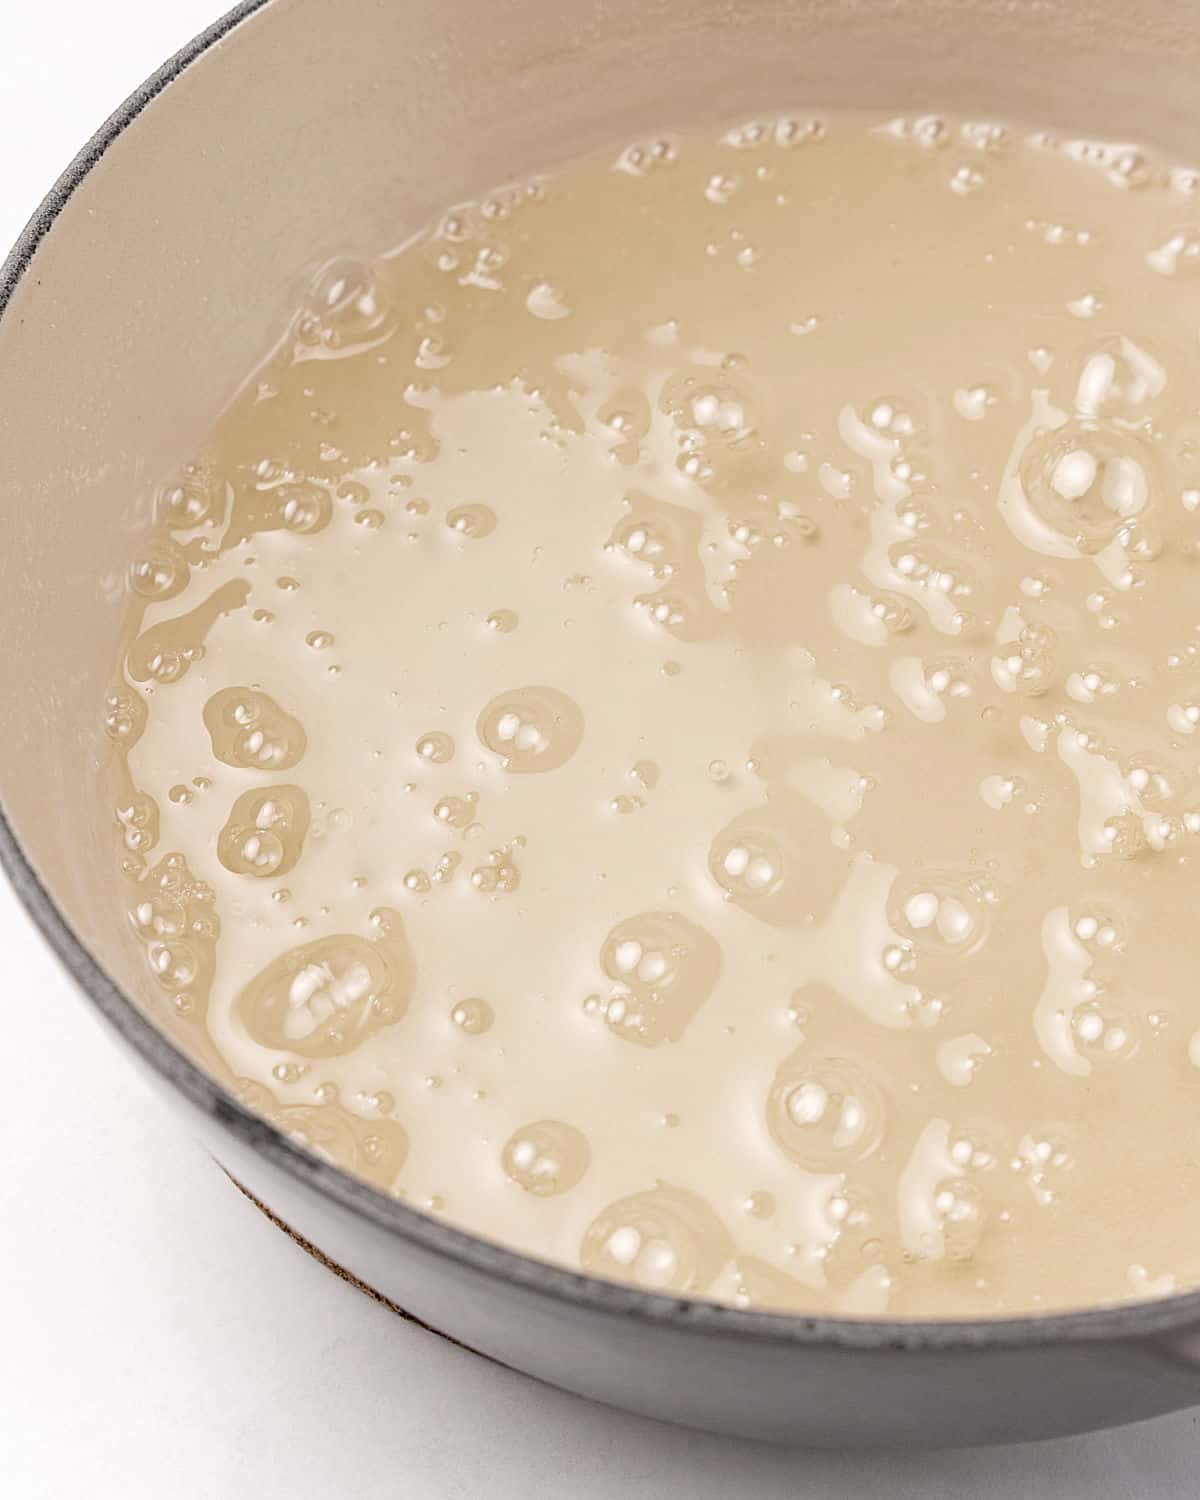 Syrup bubbling in a cream-colored skillet. White surface.